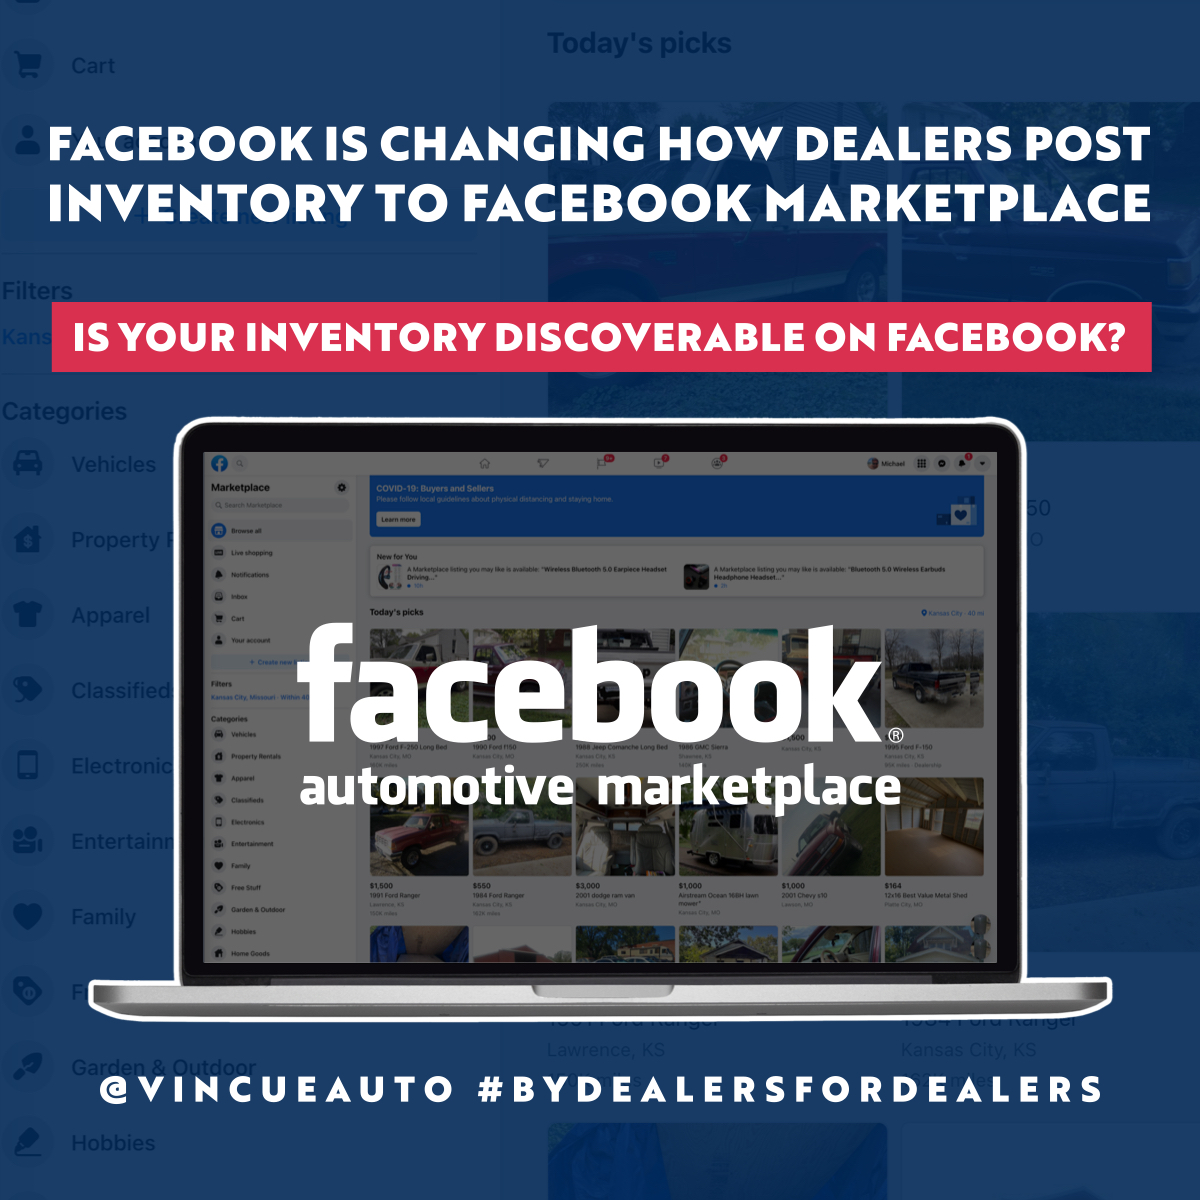 Facebook Marketplace ads bring retailers closer to purchase intent